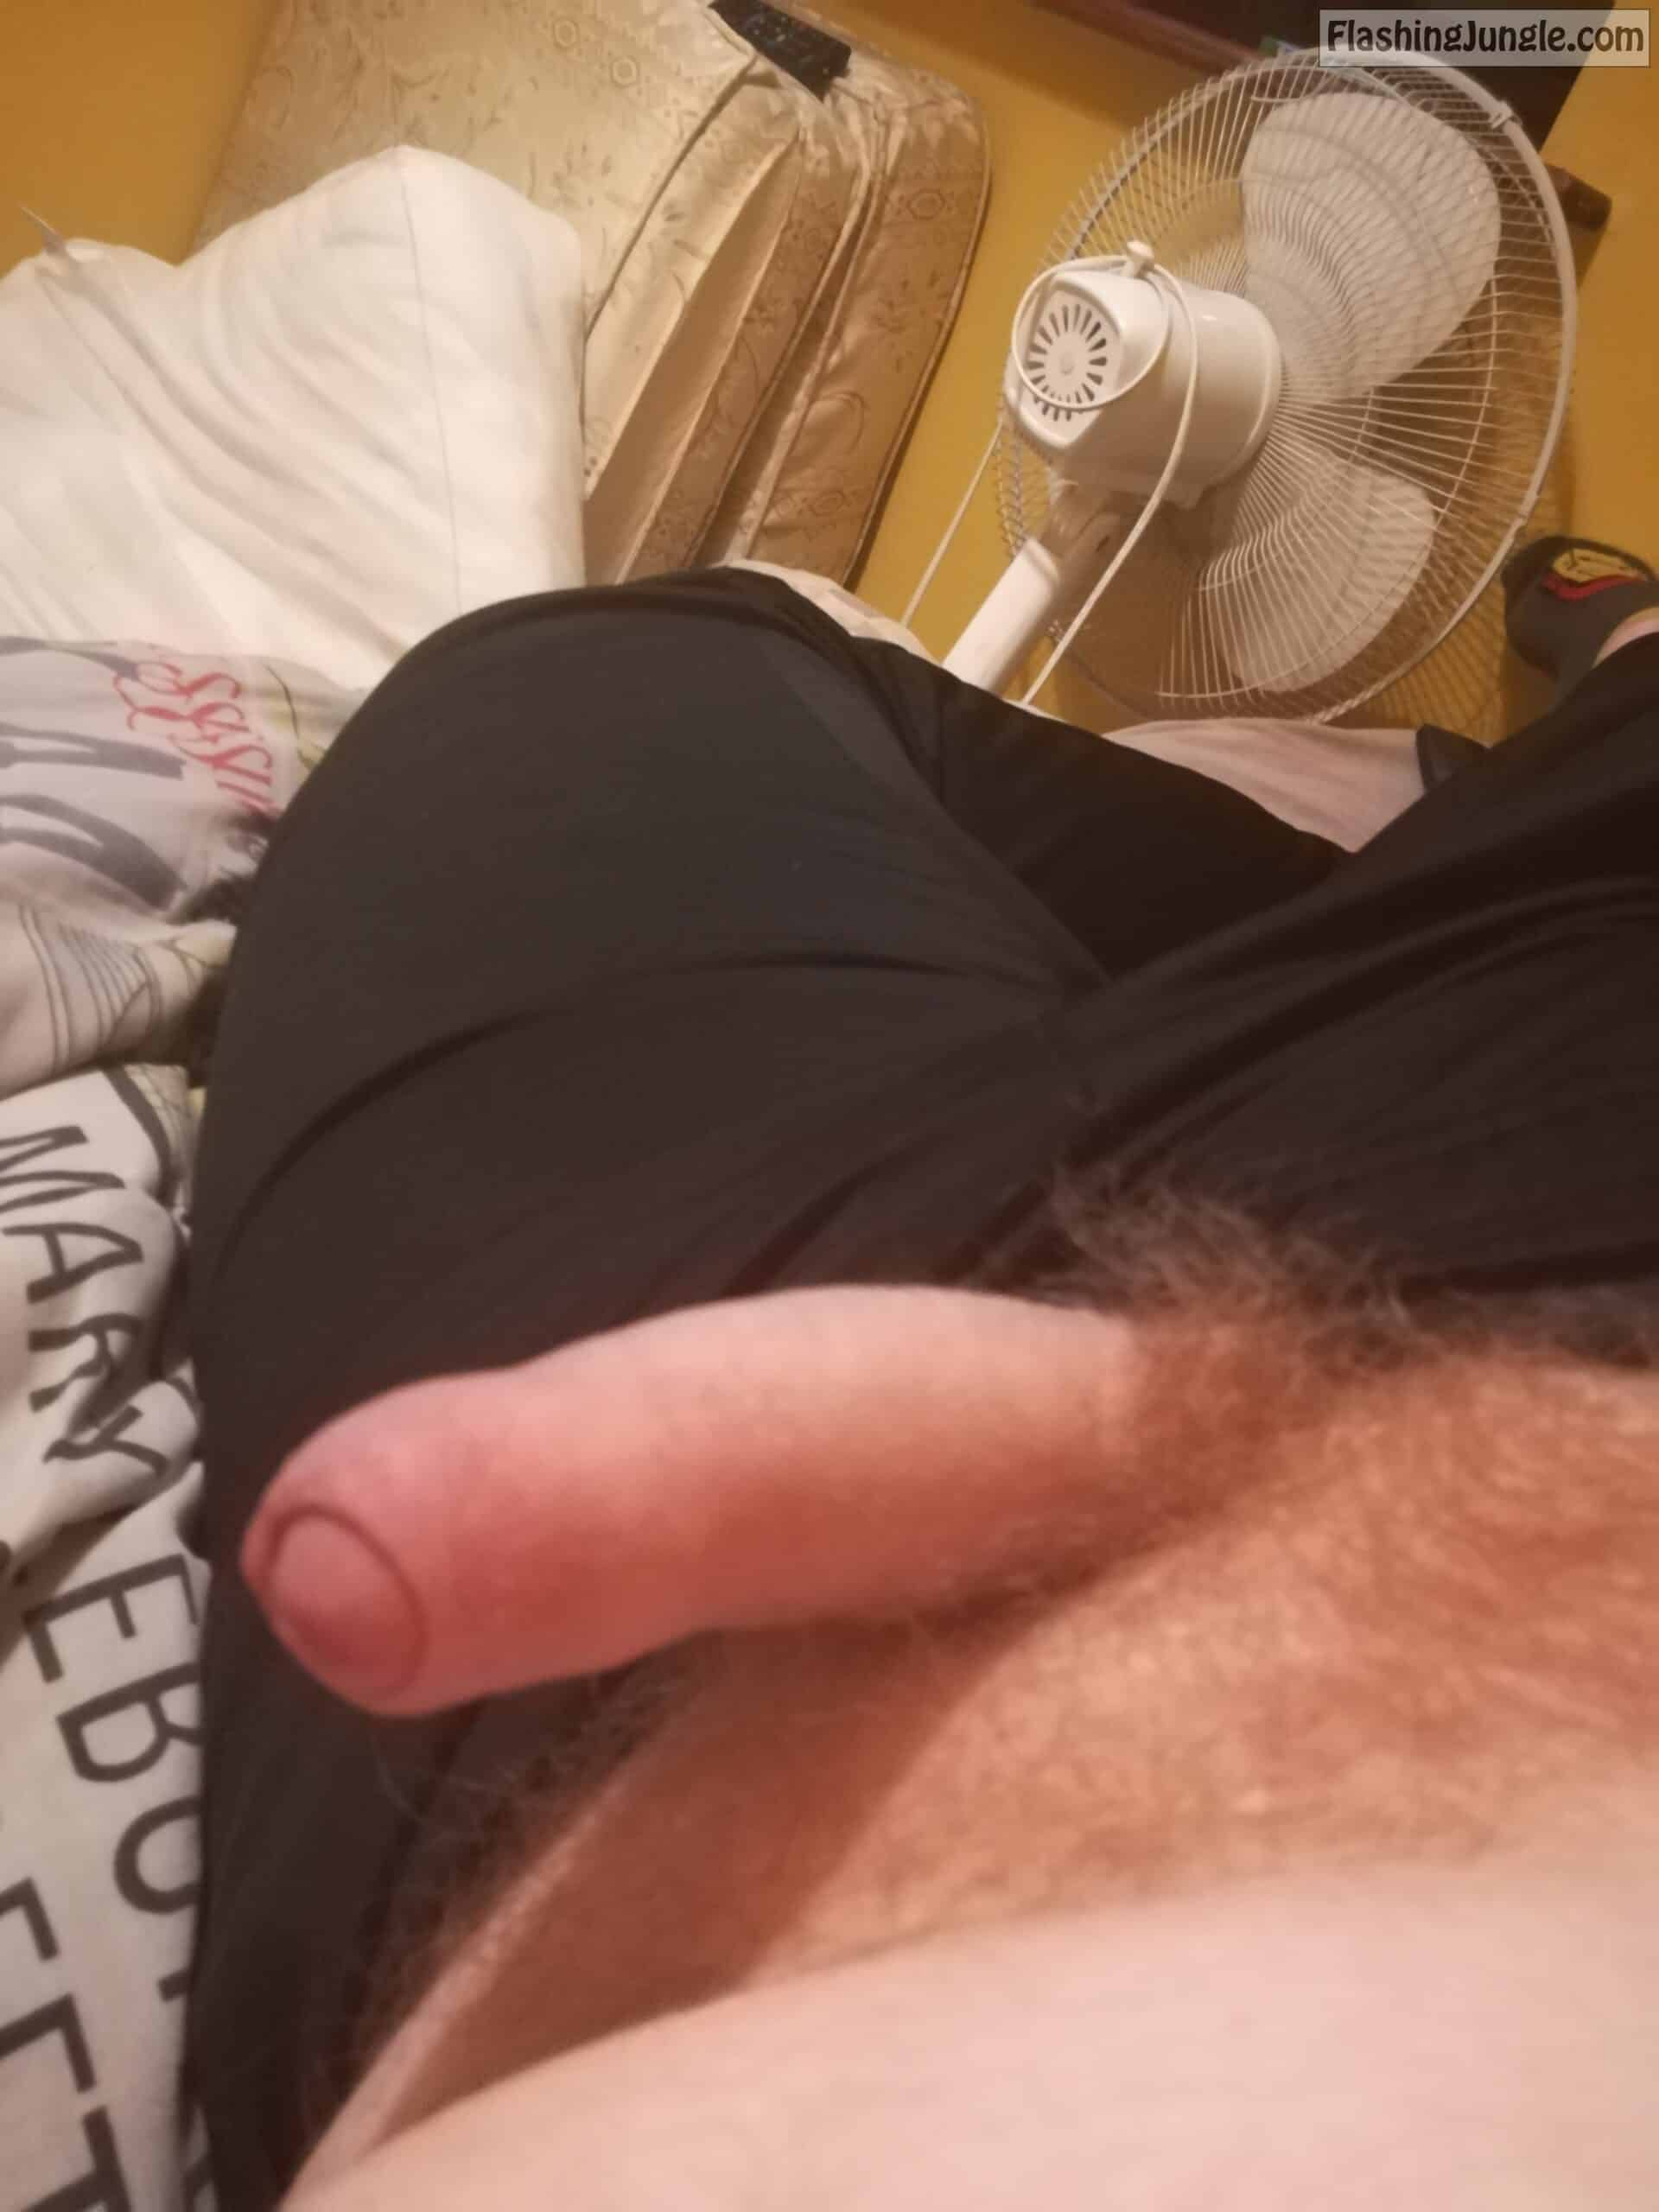 black upskirt clubs pics - My Amazing Foreskin Dick This is my first dick pic - Dick Flash Pics